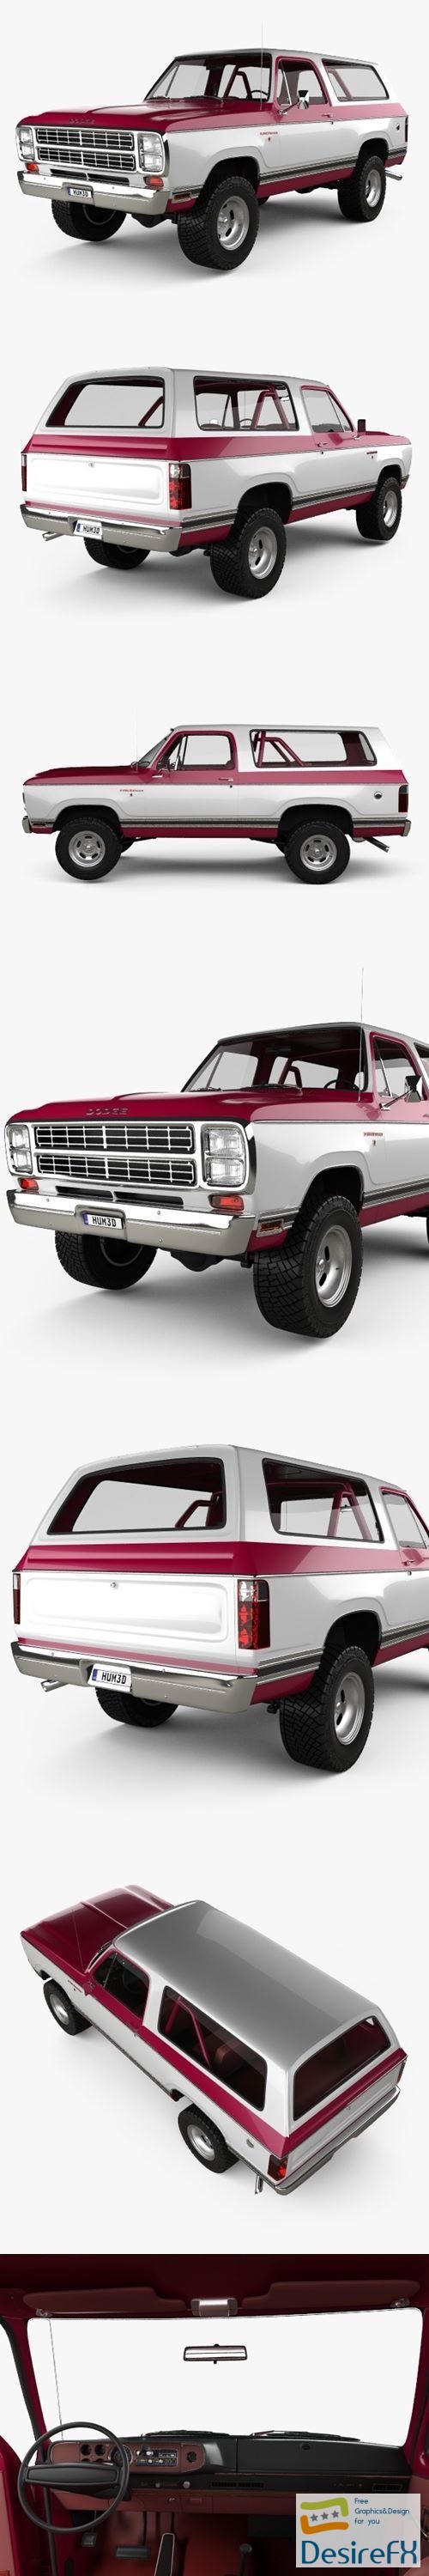 Dodge Ramcharger with HQ interior 1979 3D Model